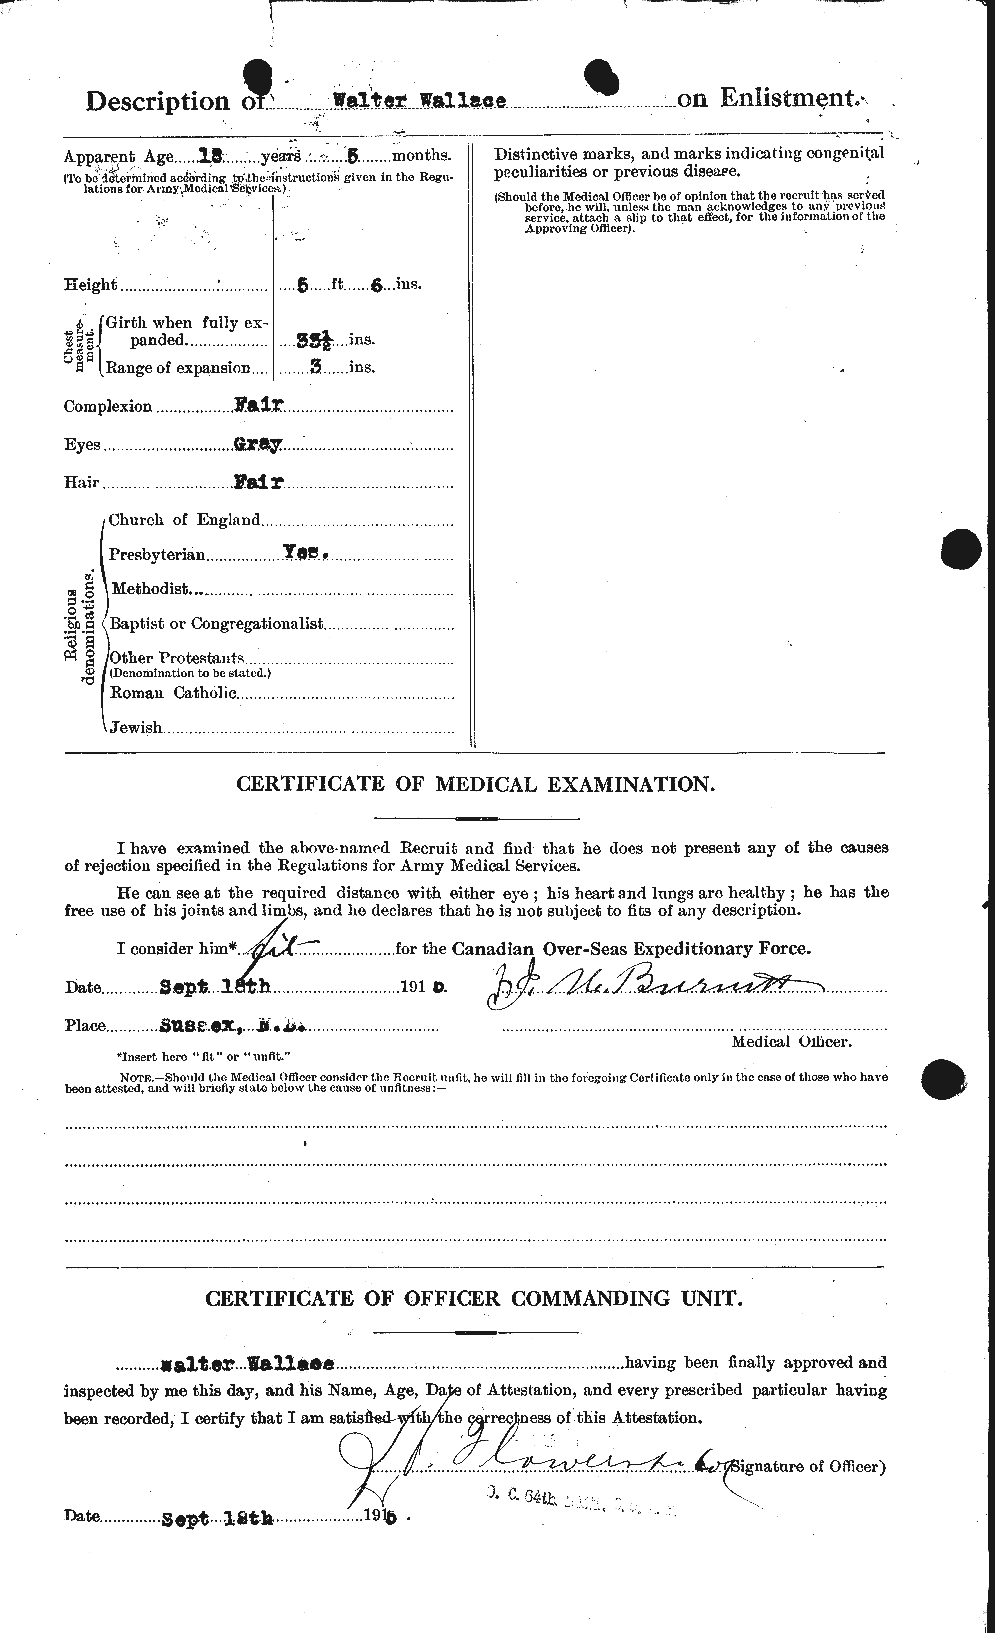 Personnel Records of the First World War - CEF 660685b